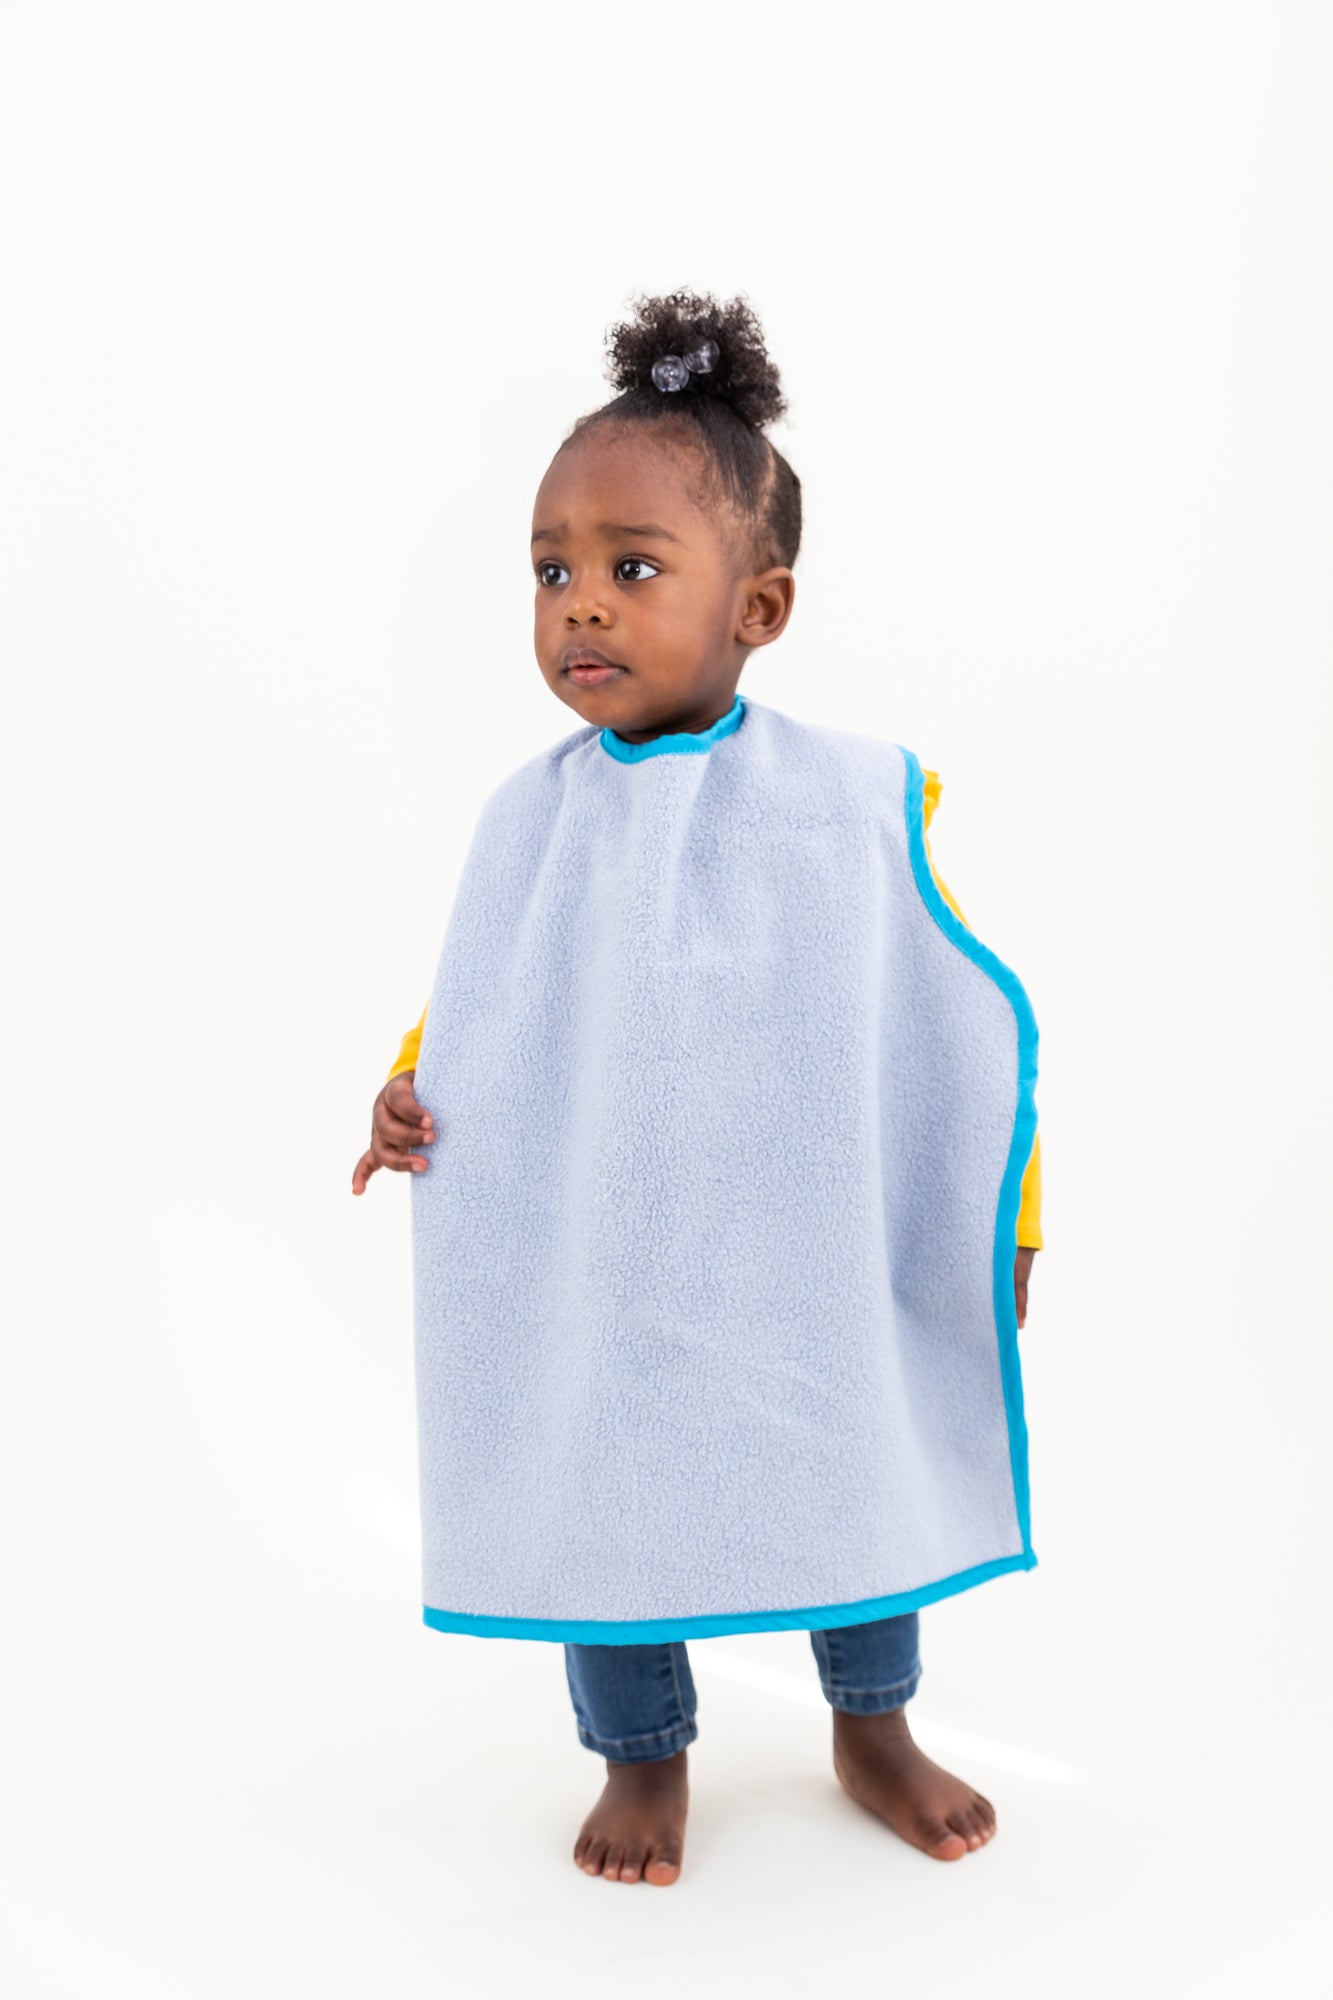 Oversized at 24" long x 19" wide, Car Seat Bib is soft, lightweight, breathable, washable, organic, kid-safe, toxin-free, eco-friendly, and made in the USA.